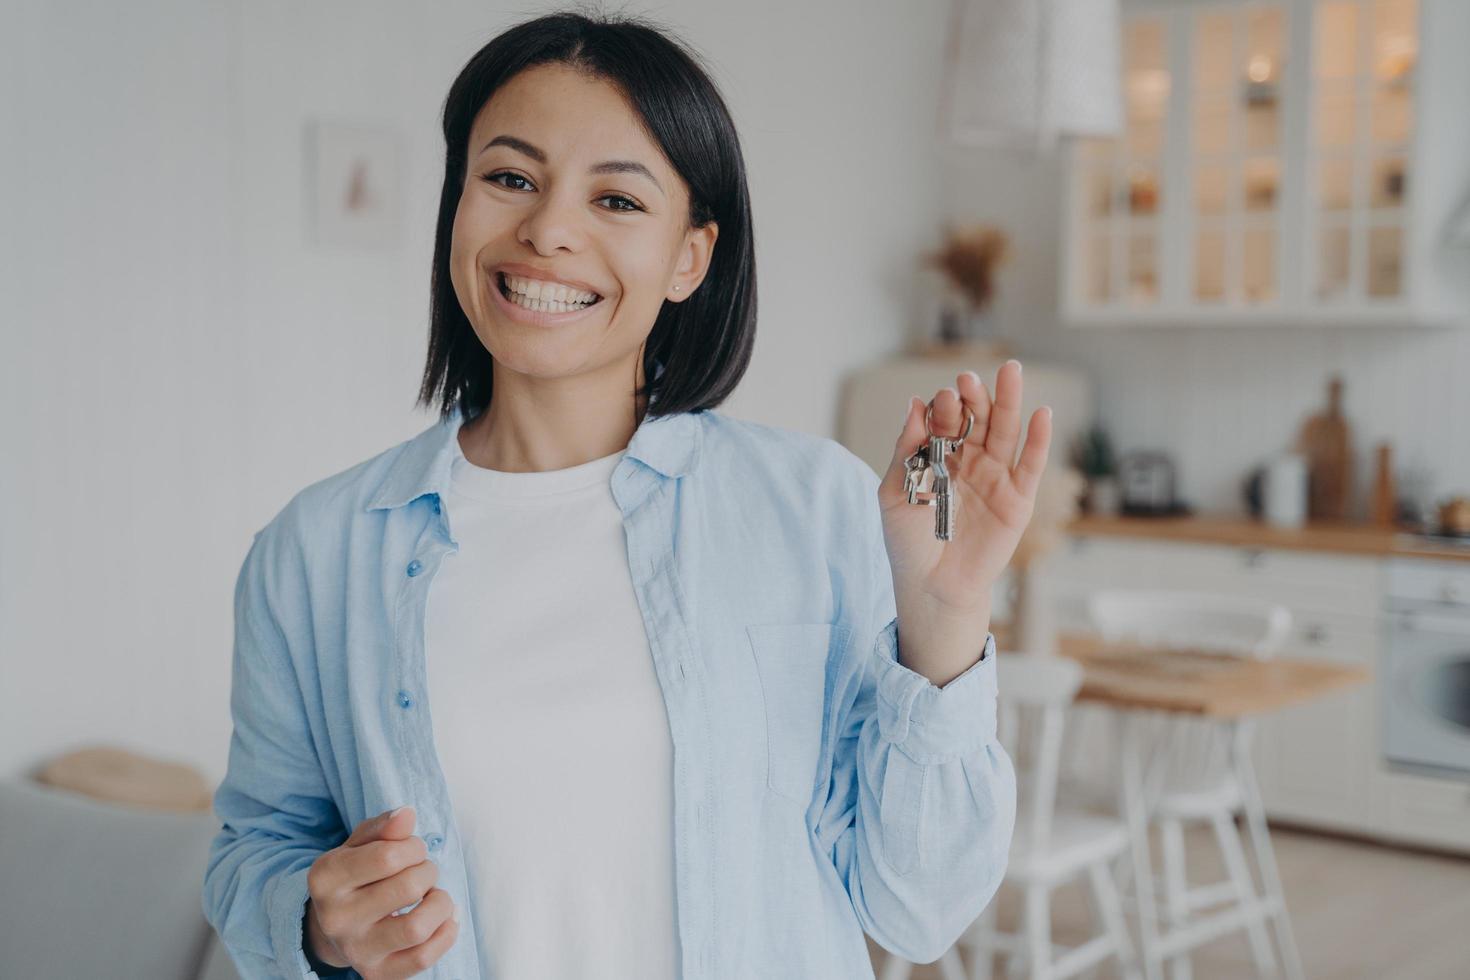 Smiling woman showing holding keys to new house. Real estate sale, rental. Mortgage advertisement photo